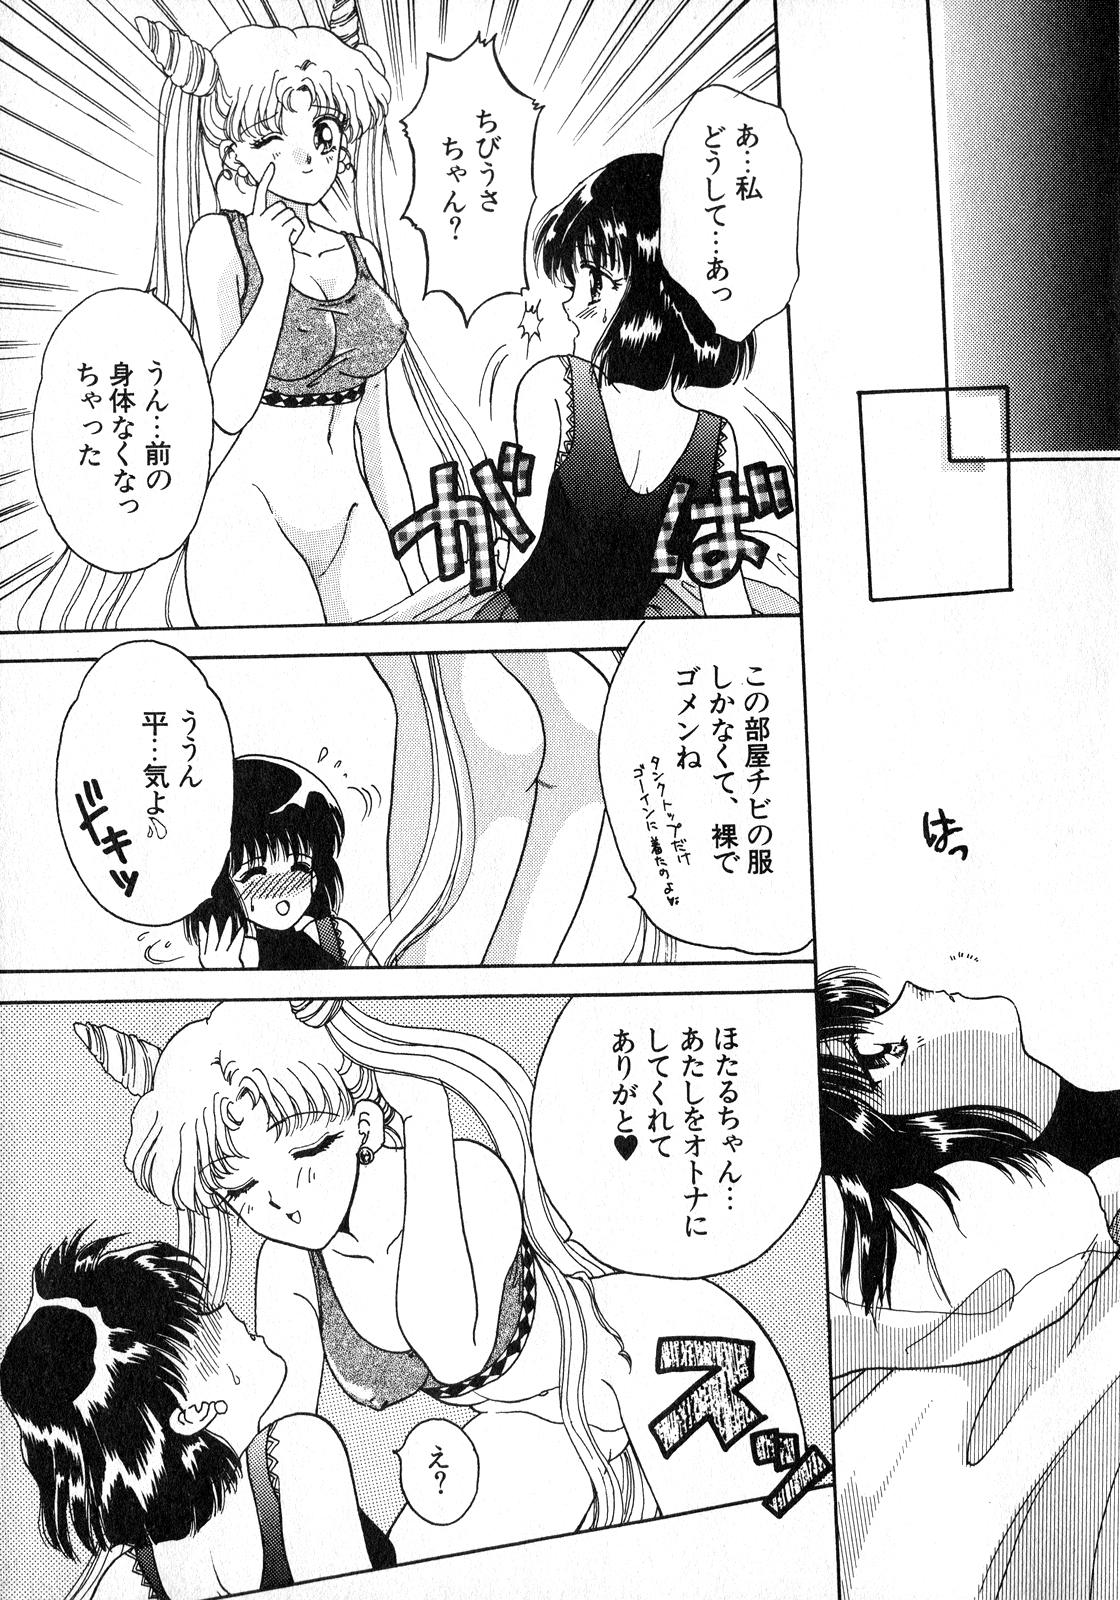 Missionary Porn Lunatic Party 8 - Sailor moon Dick Sucking - Page 12